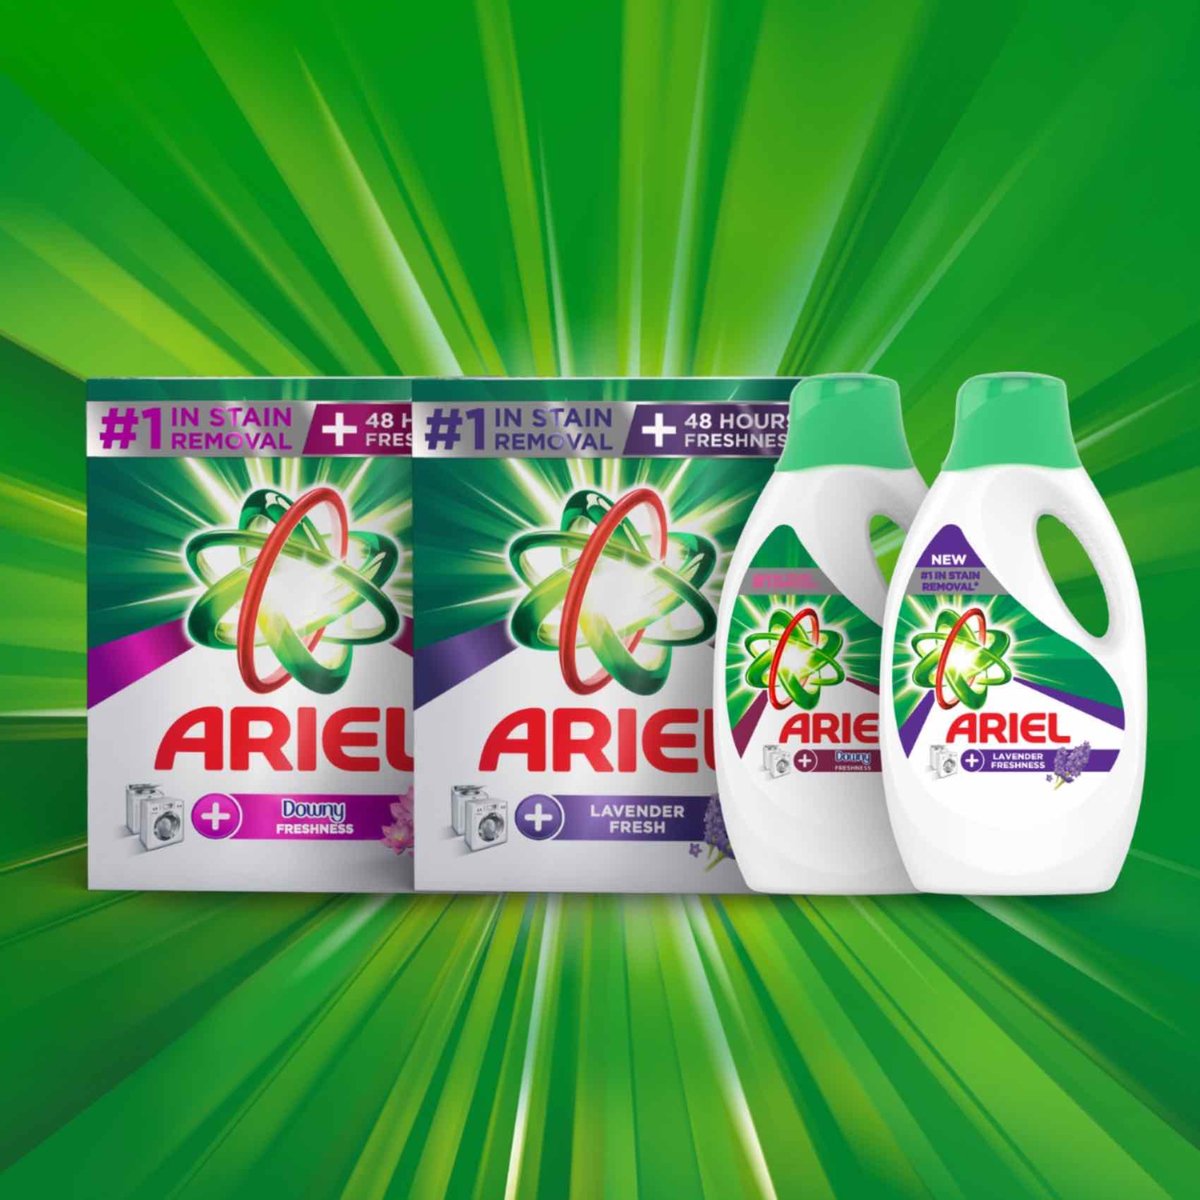 Ariel Automatic Lavender Laundry Detergent Powder, Number 1 in Stain Removal with 48 Hours of Freshness, 2 x 2.5 kg